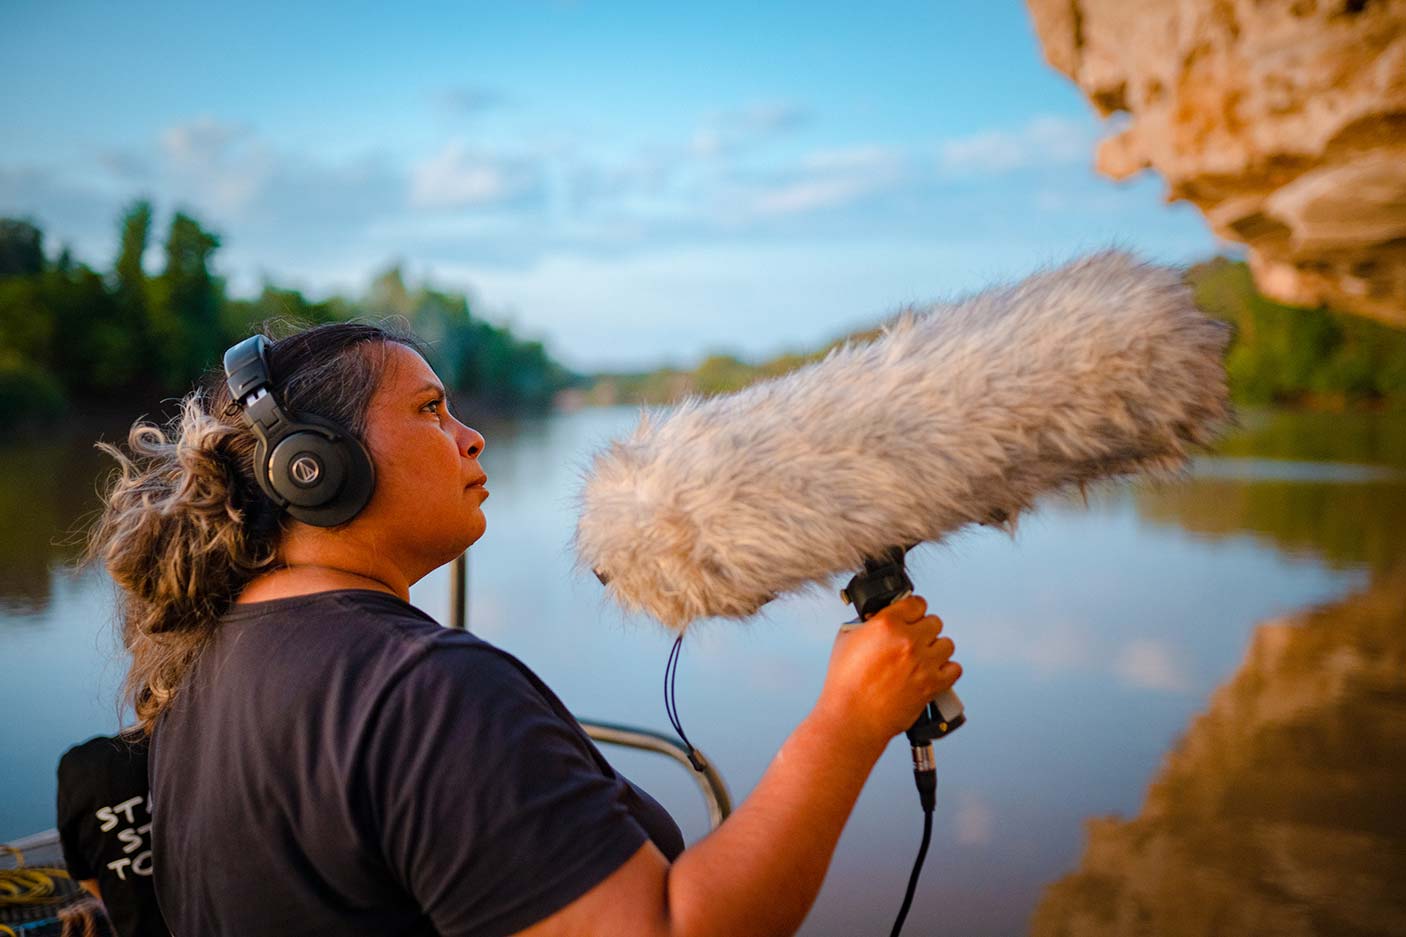 An Aboriginal woman holding a microphone at a lake